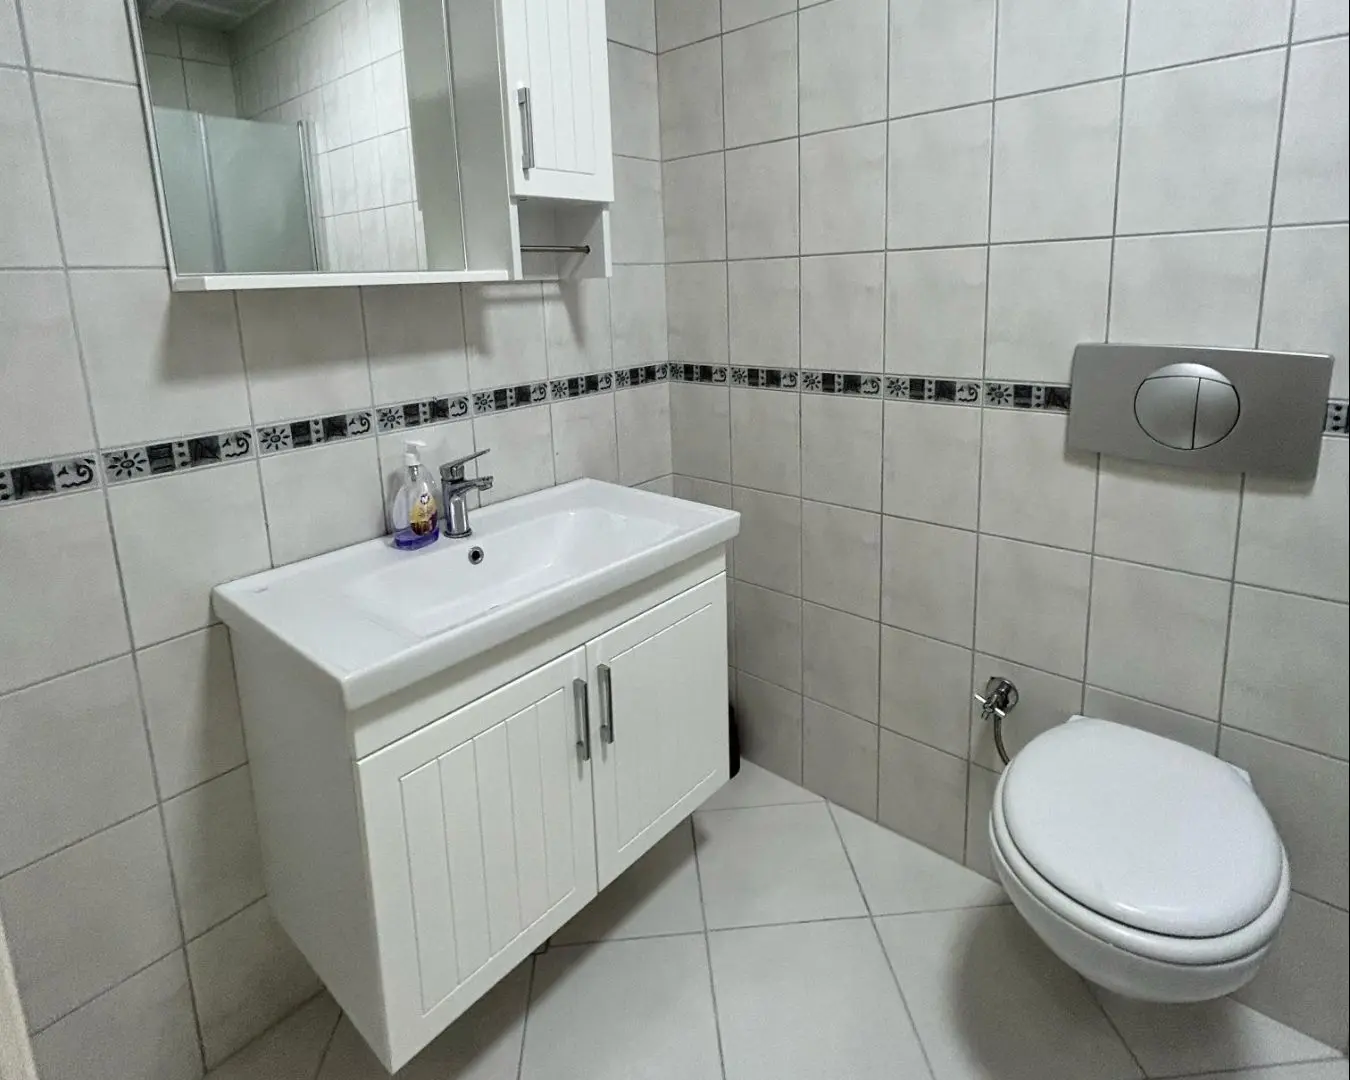 2+1 FLAT IN ALANYA CENTER, 100 METERS FROM THE SEA